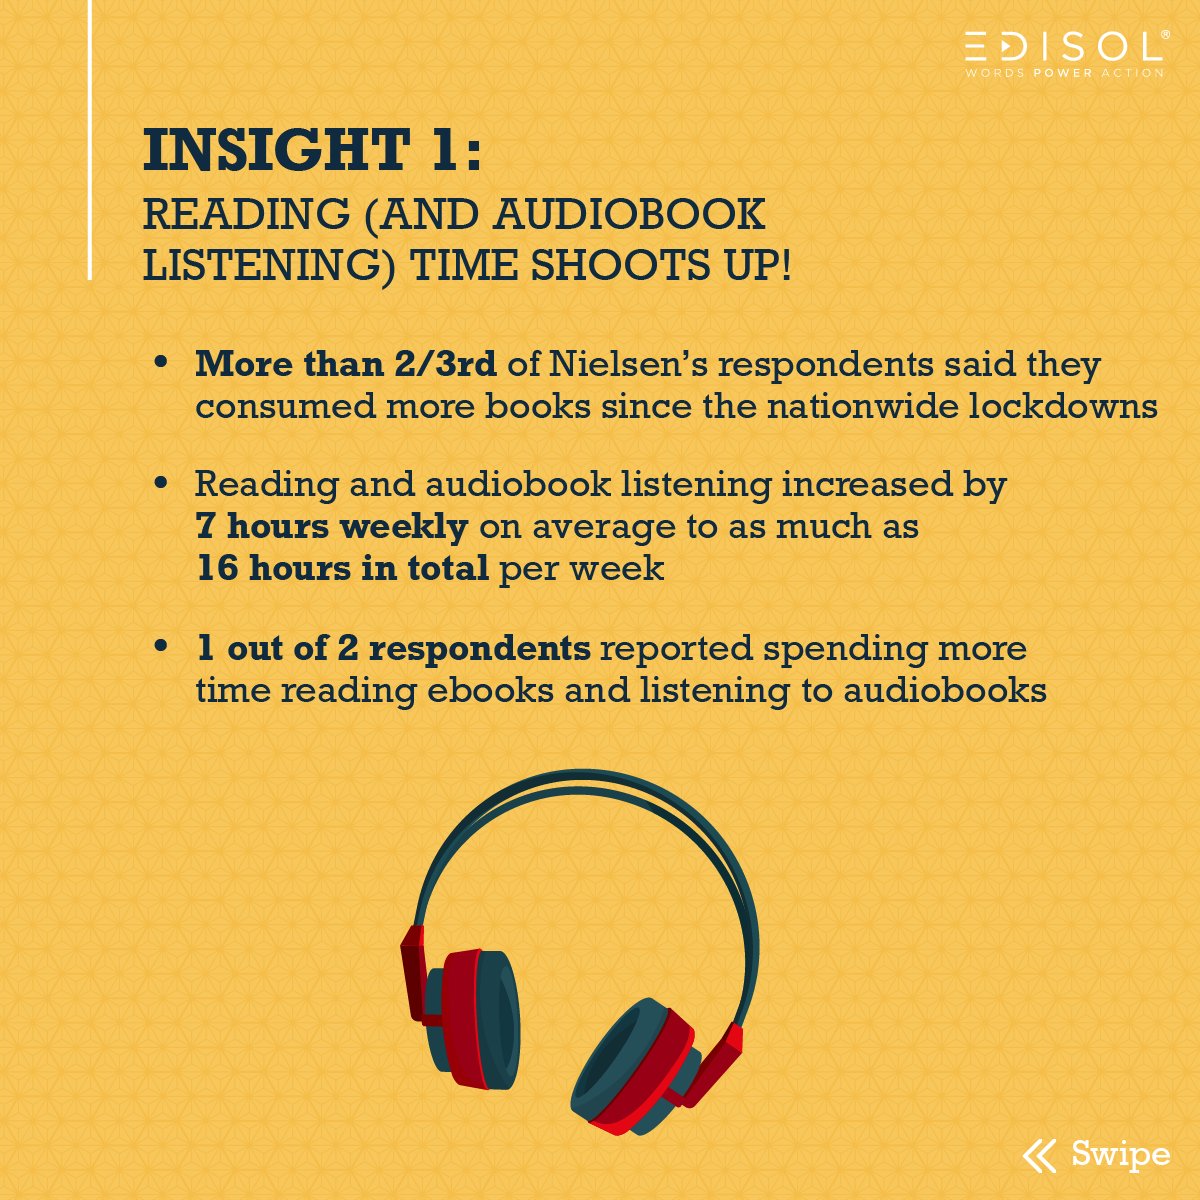 This #ReadANewBookMonth, we’re taking a look at some of the #ReadingTrends that were observed amid the #COVID19 pandemic in #India. Here are 3 #insights from the @NielsenBook India study that left us shocked & pleased!
#NielsonBook #NielsonBookResearch #IndianBookReaders
[PART 1]